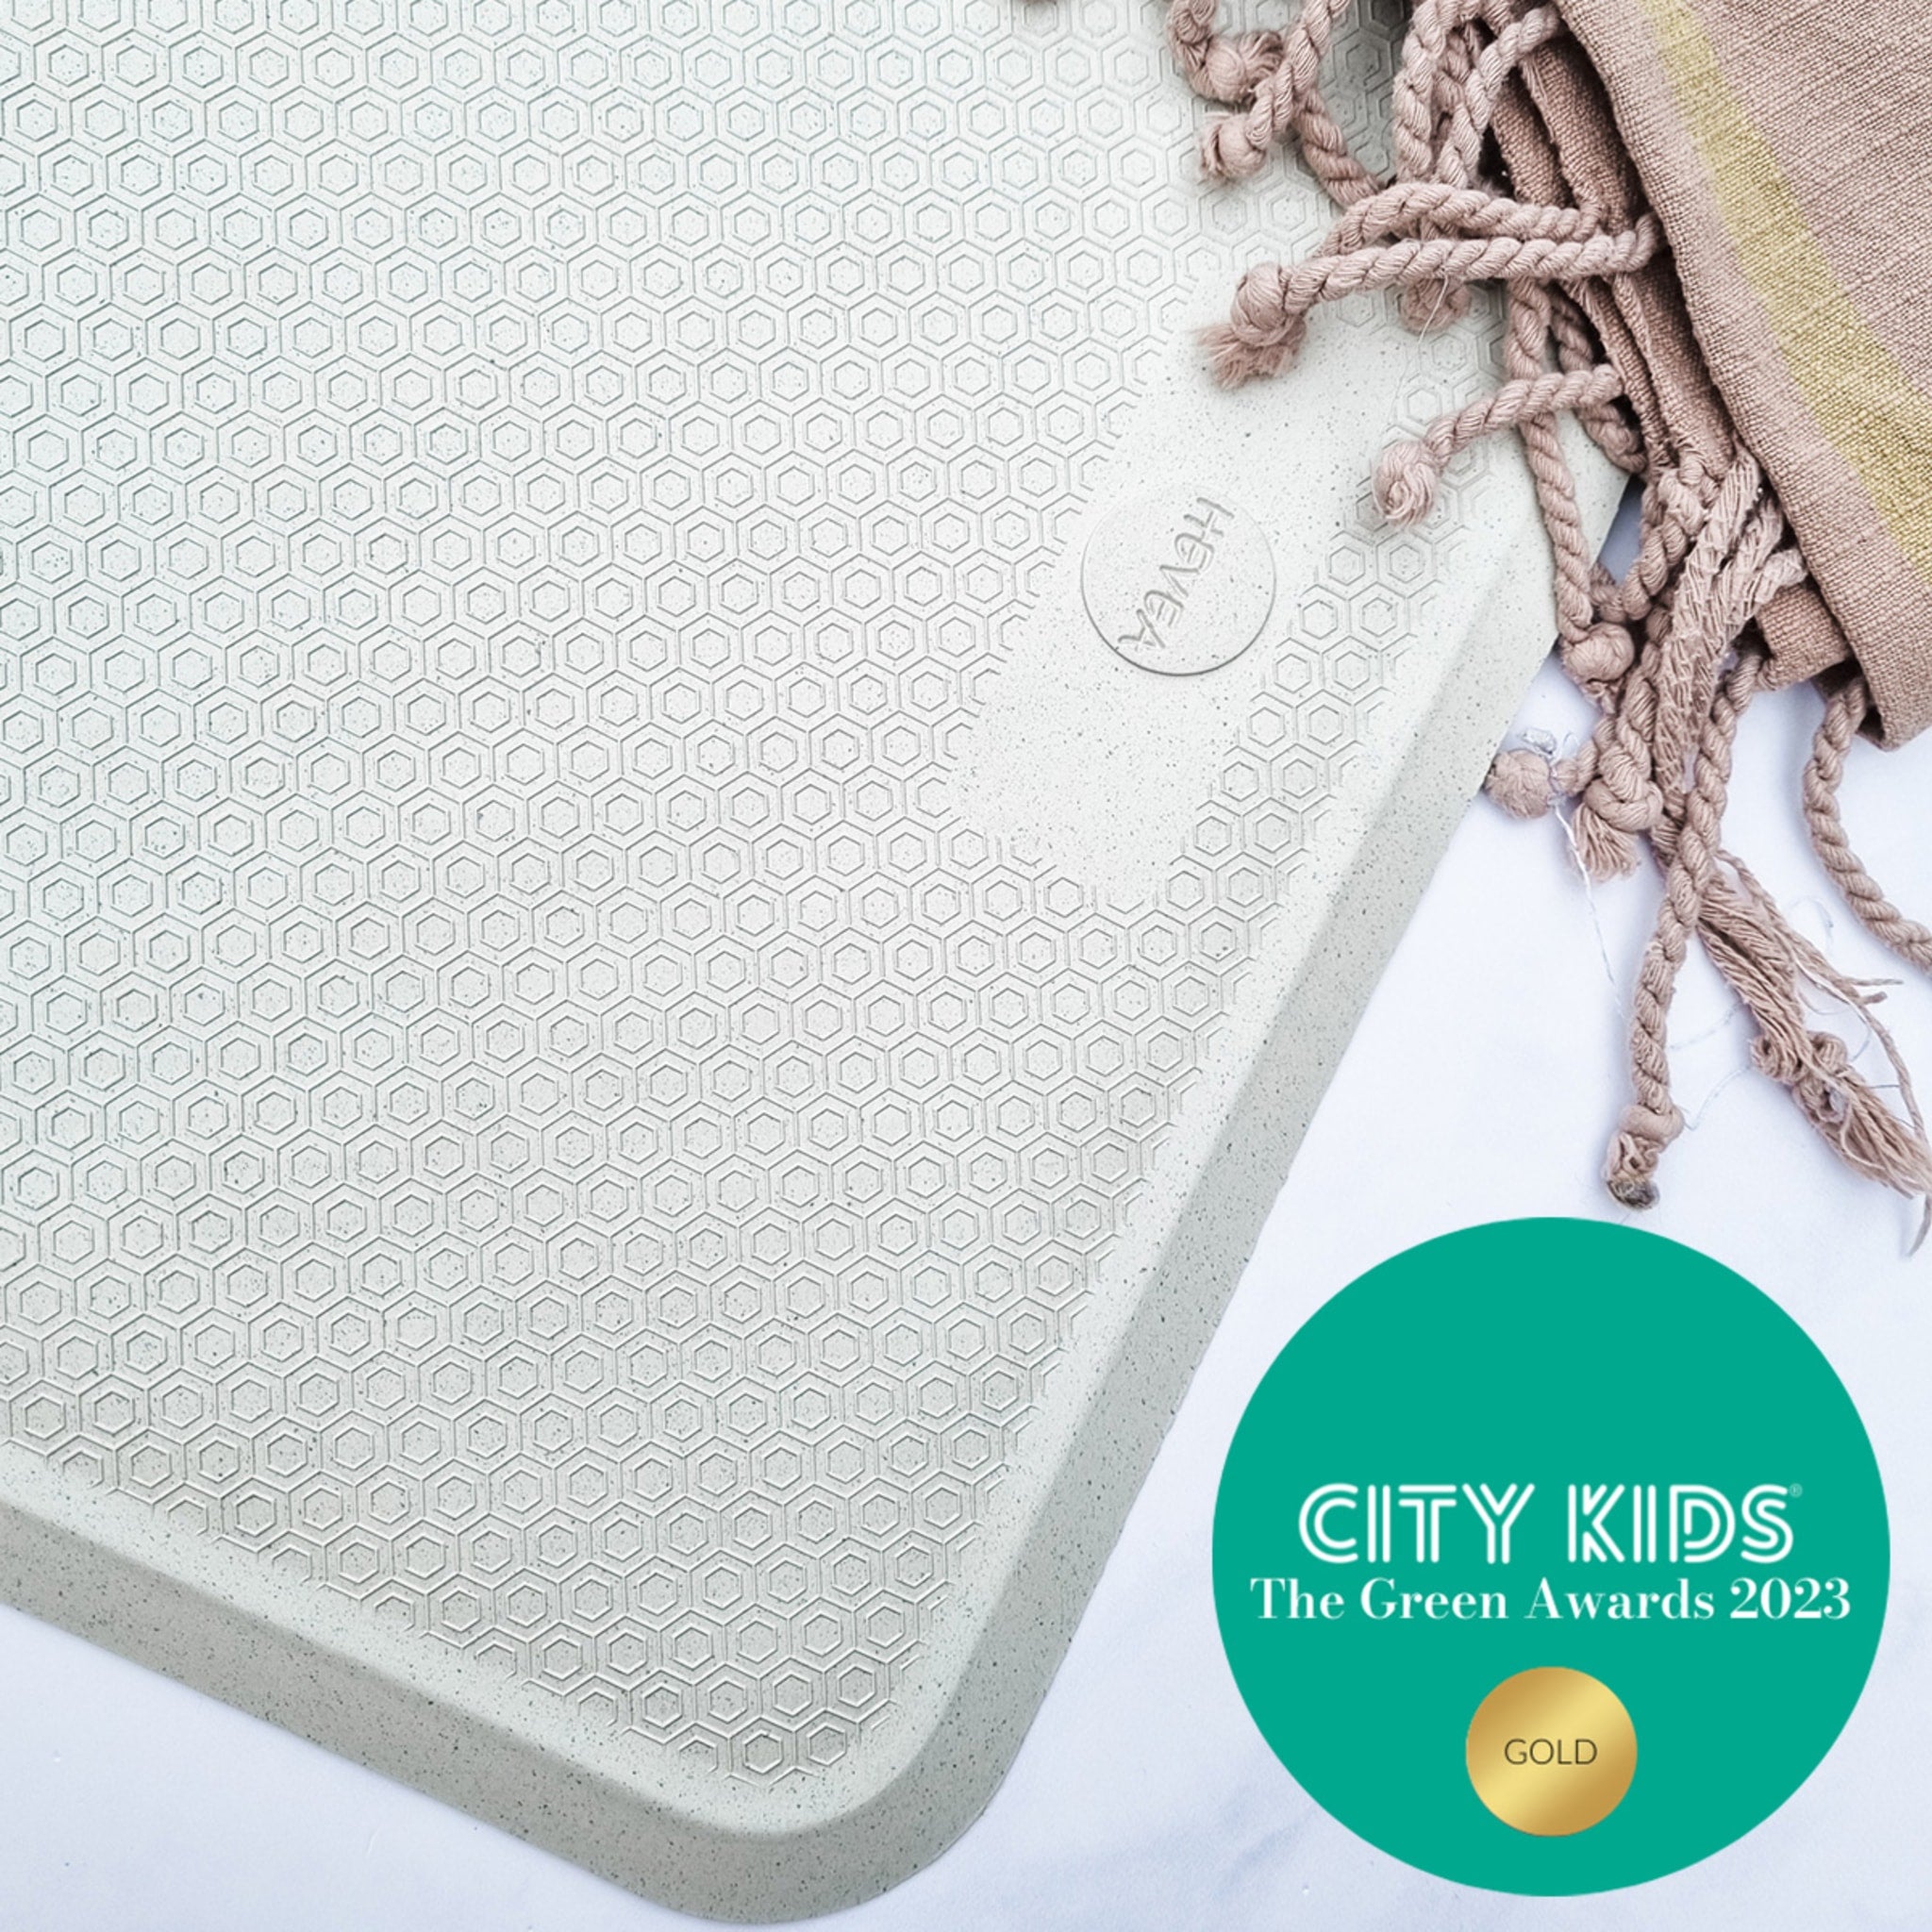 Baby Bath Mat in Natural Rubber –